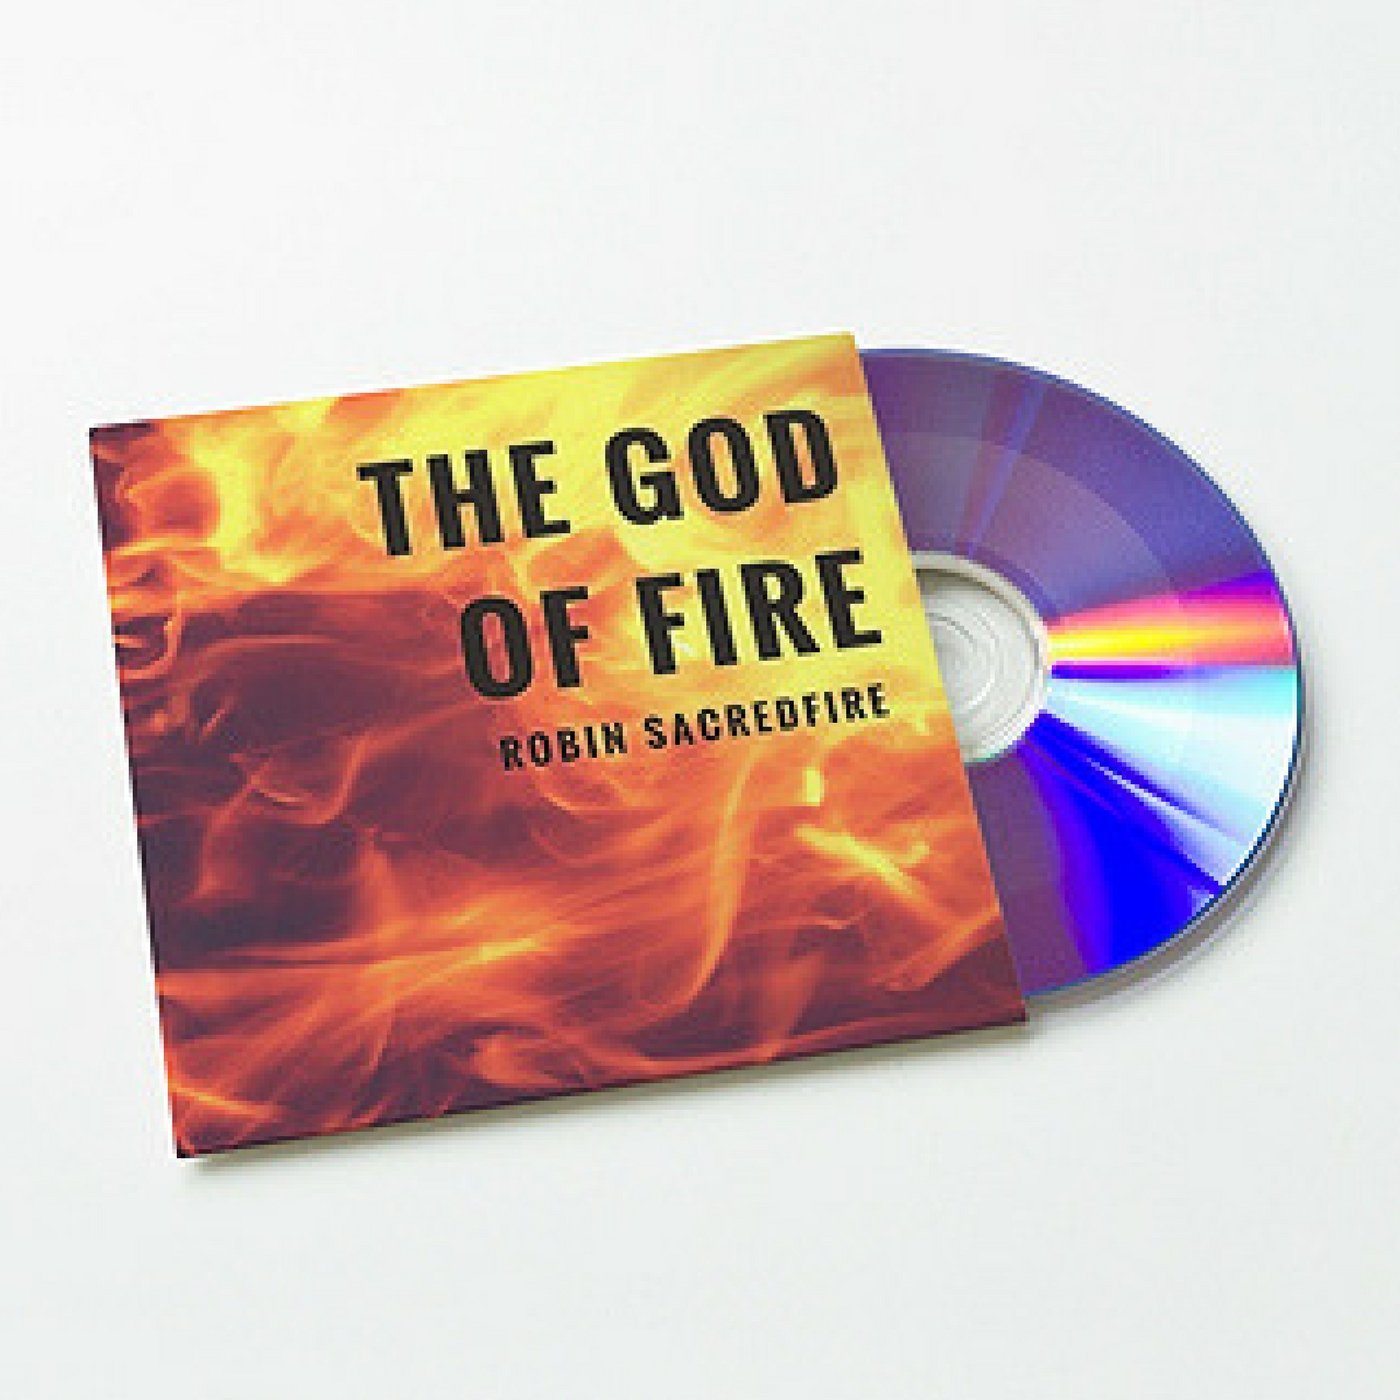 The God of Fire (Audiobook)